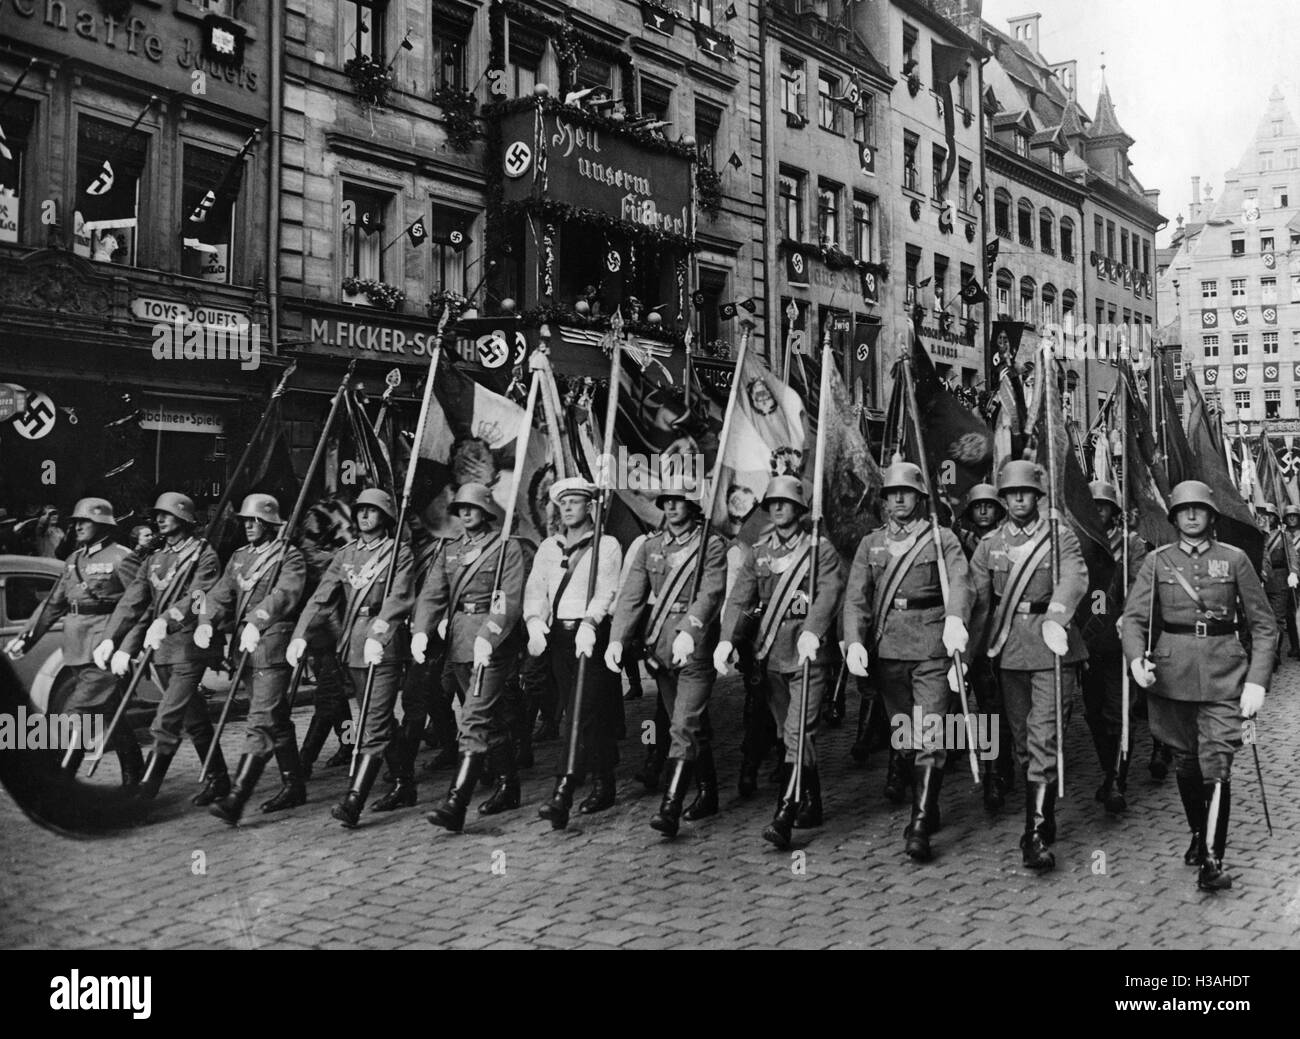 Flag Company of the Wehrmacht during the Reich Party Congress in Nuremberg, 1936 Stock Photo